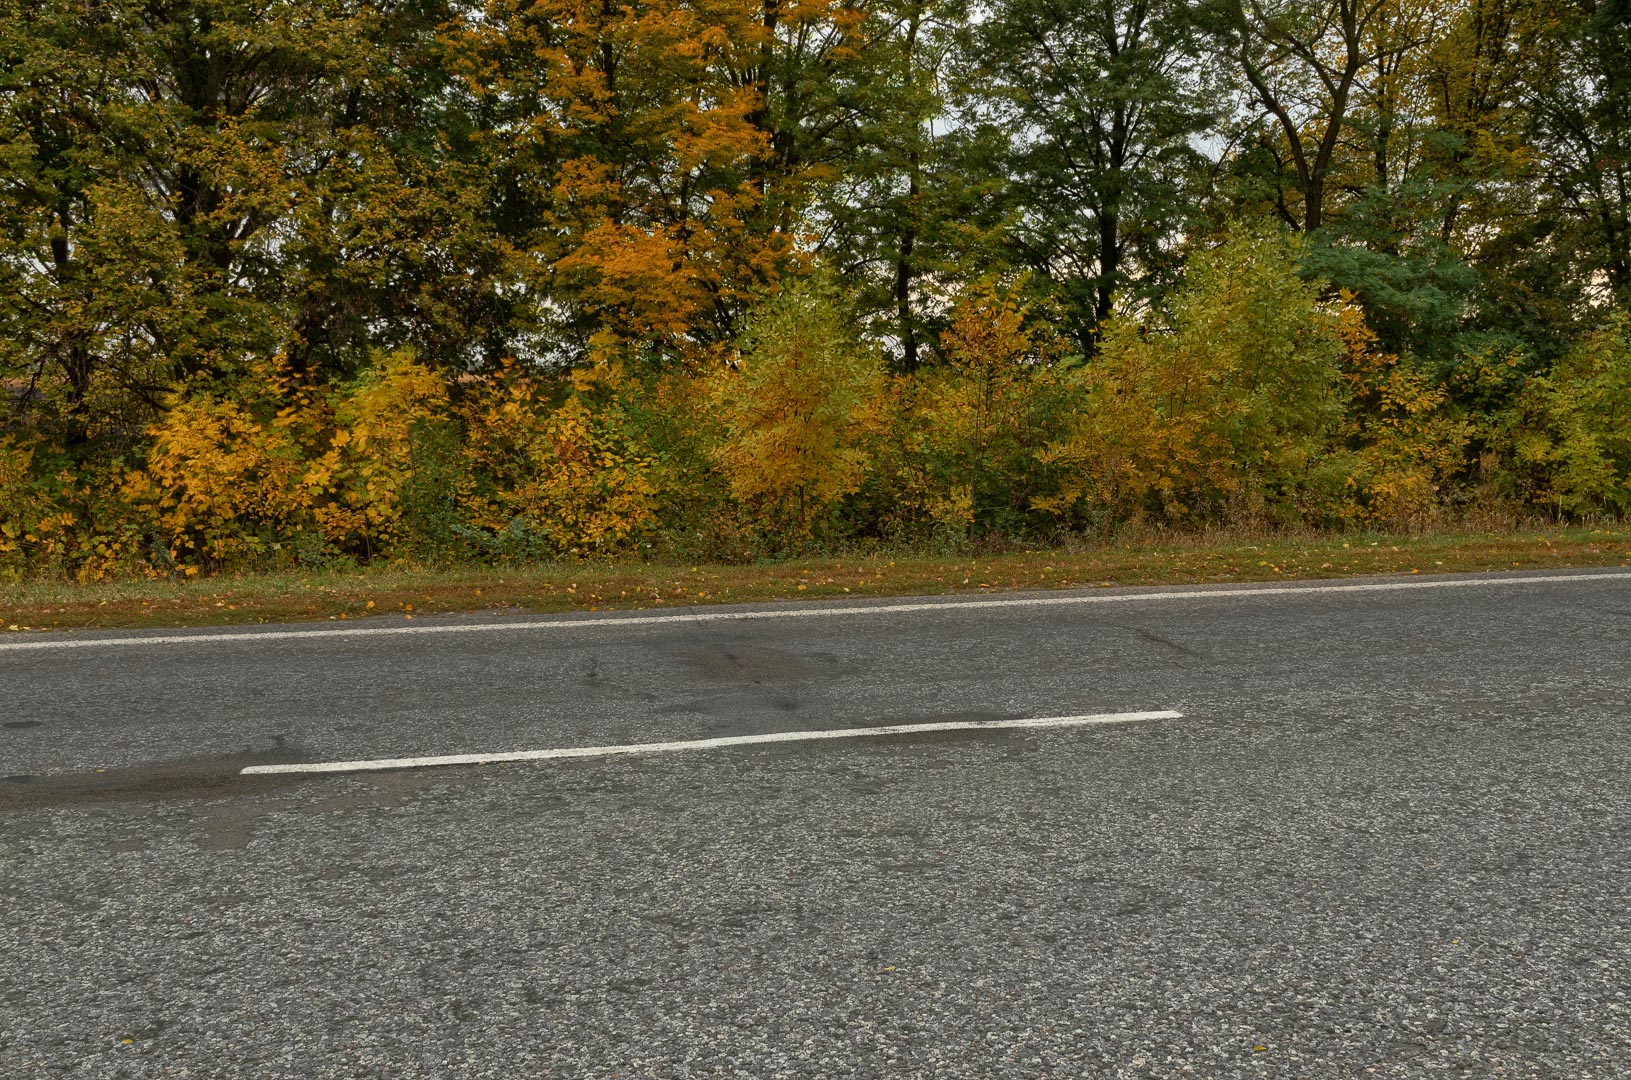 Backplate • ID: 4098 • HDRI Haven - Empty Two Lines Road